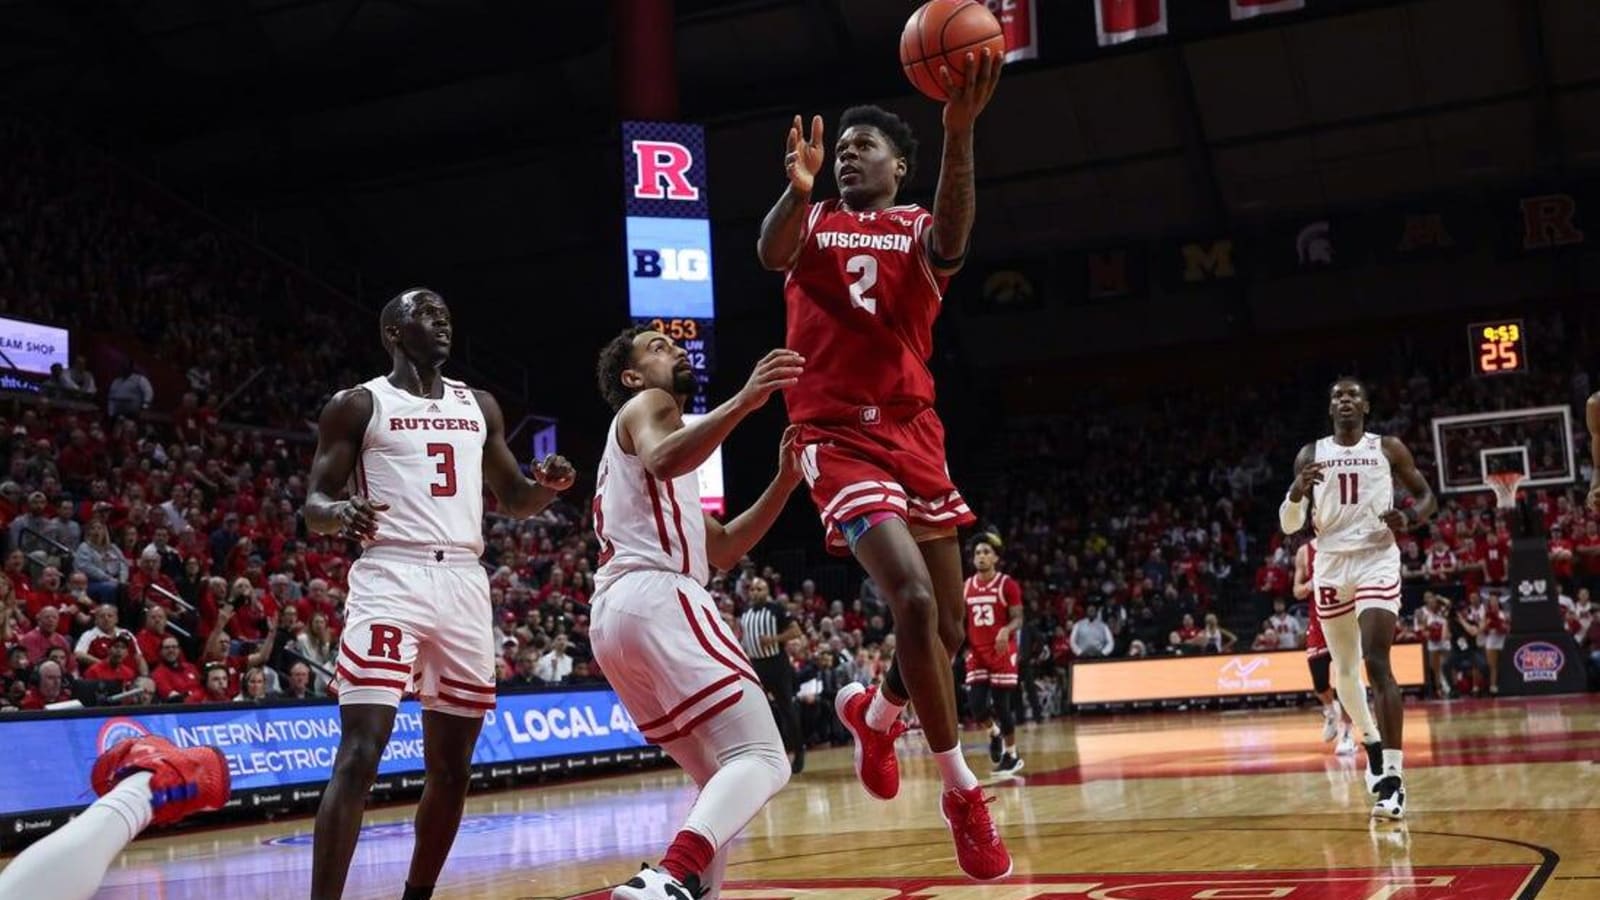 Rutgers stays hot while extending misery for No. 11 Wisconsin